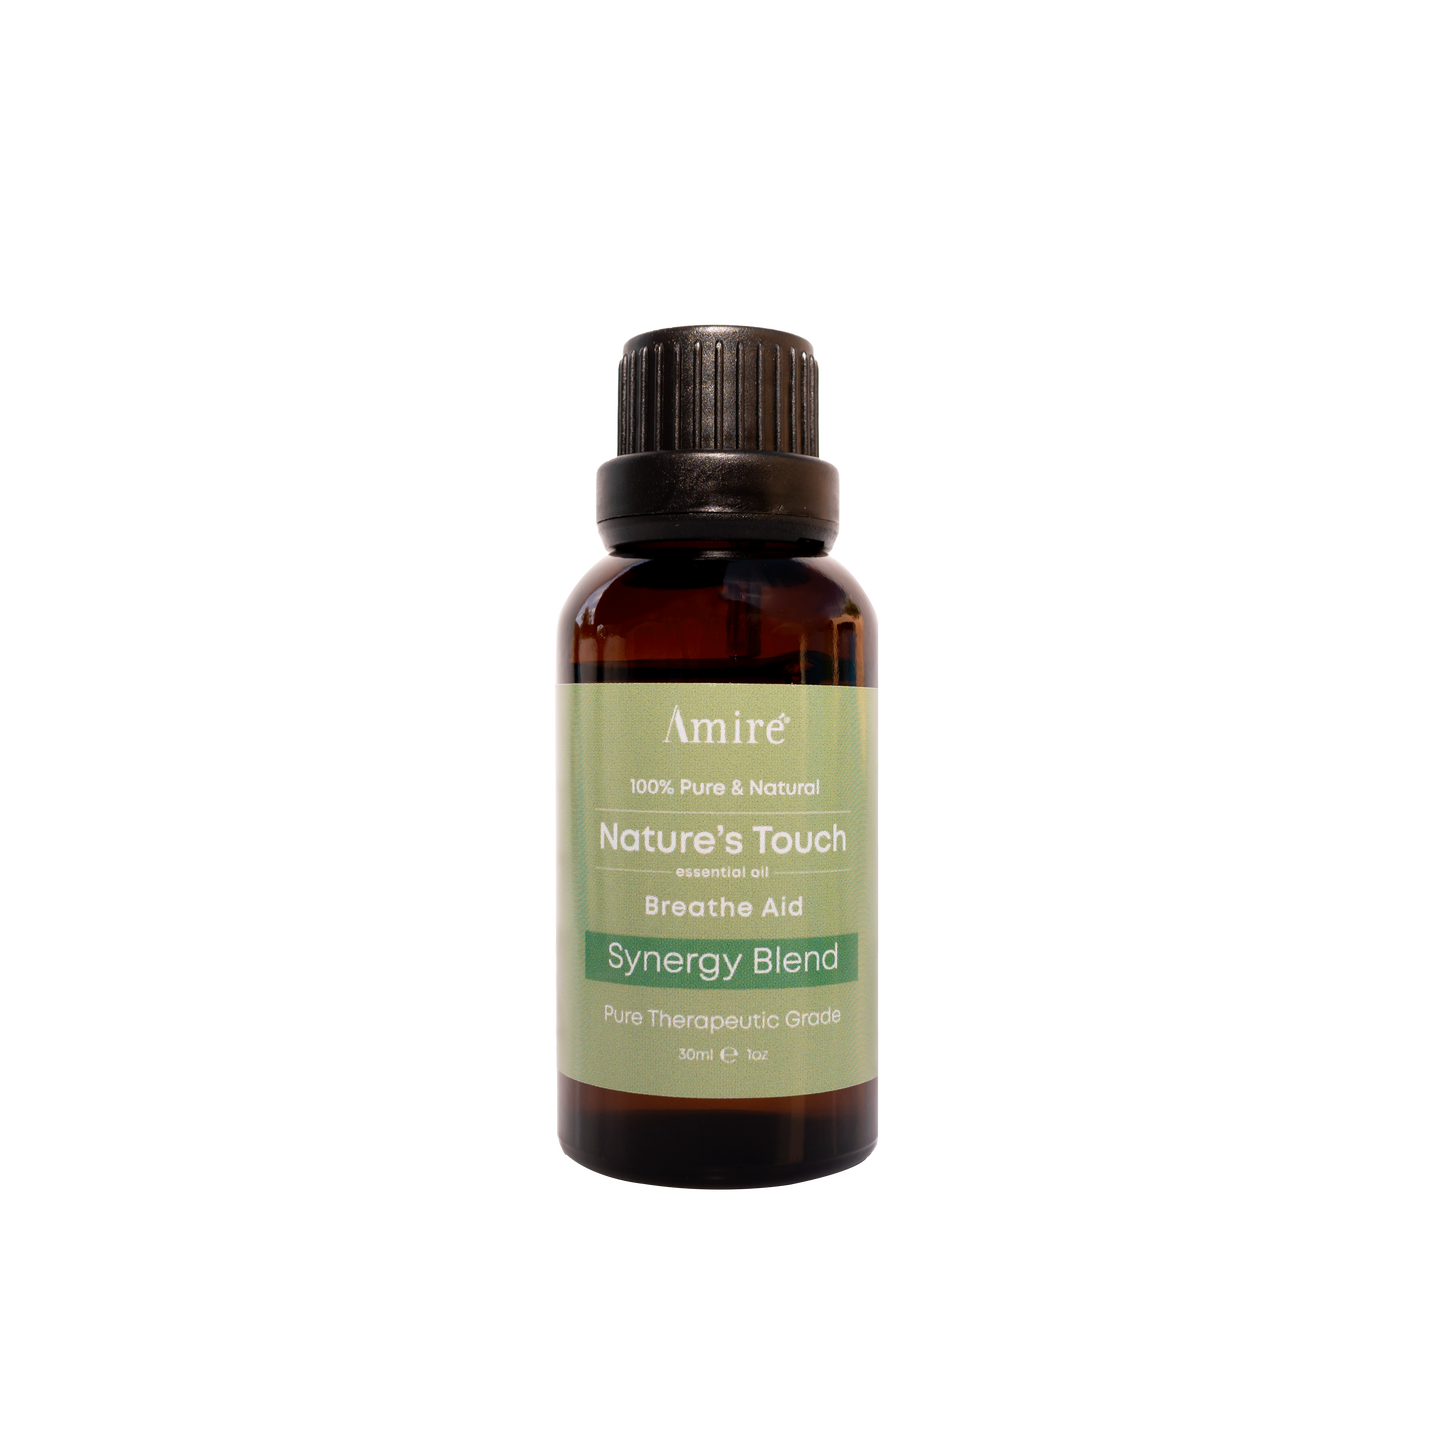 Nature's Touch Essential Oil